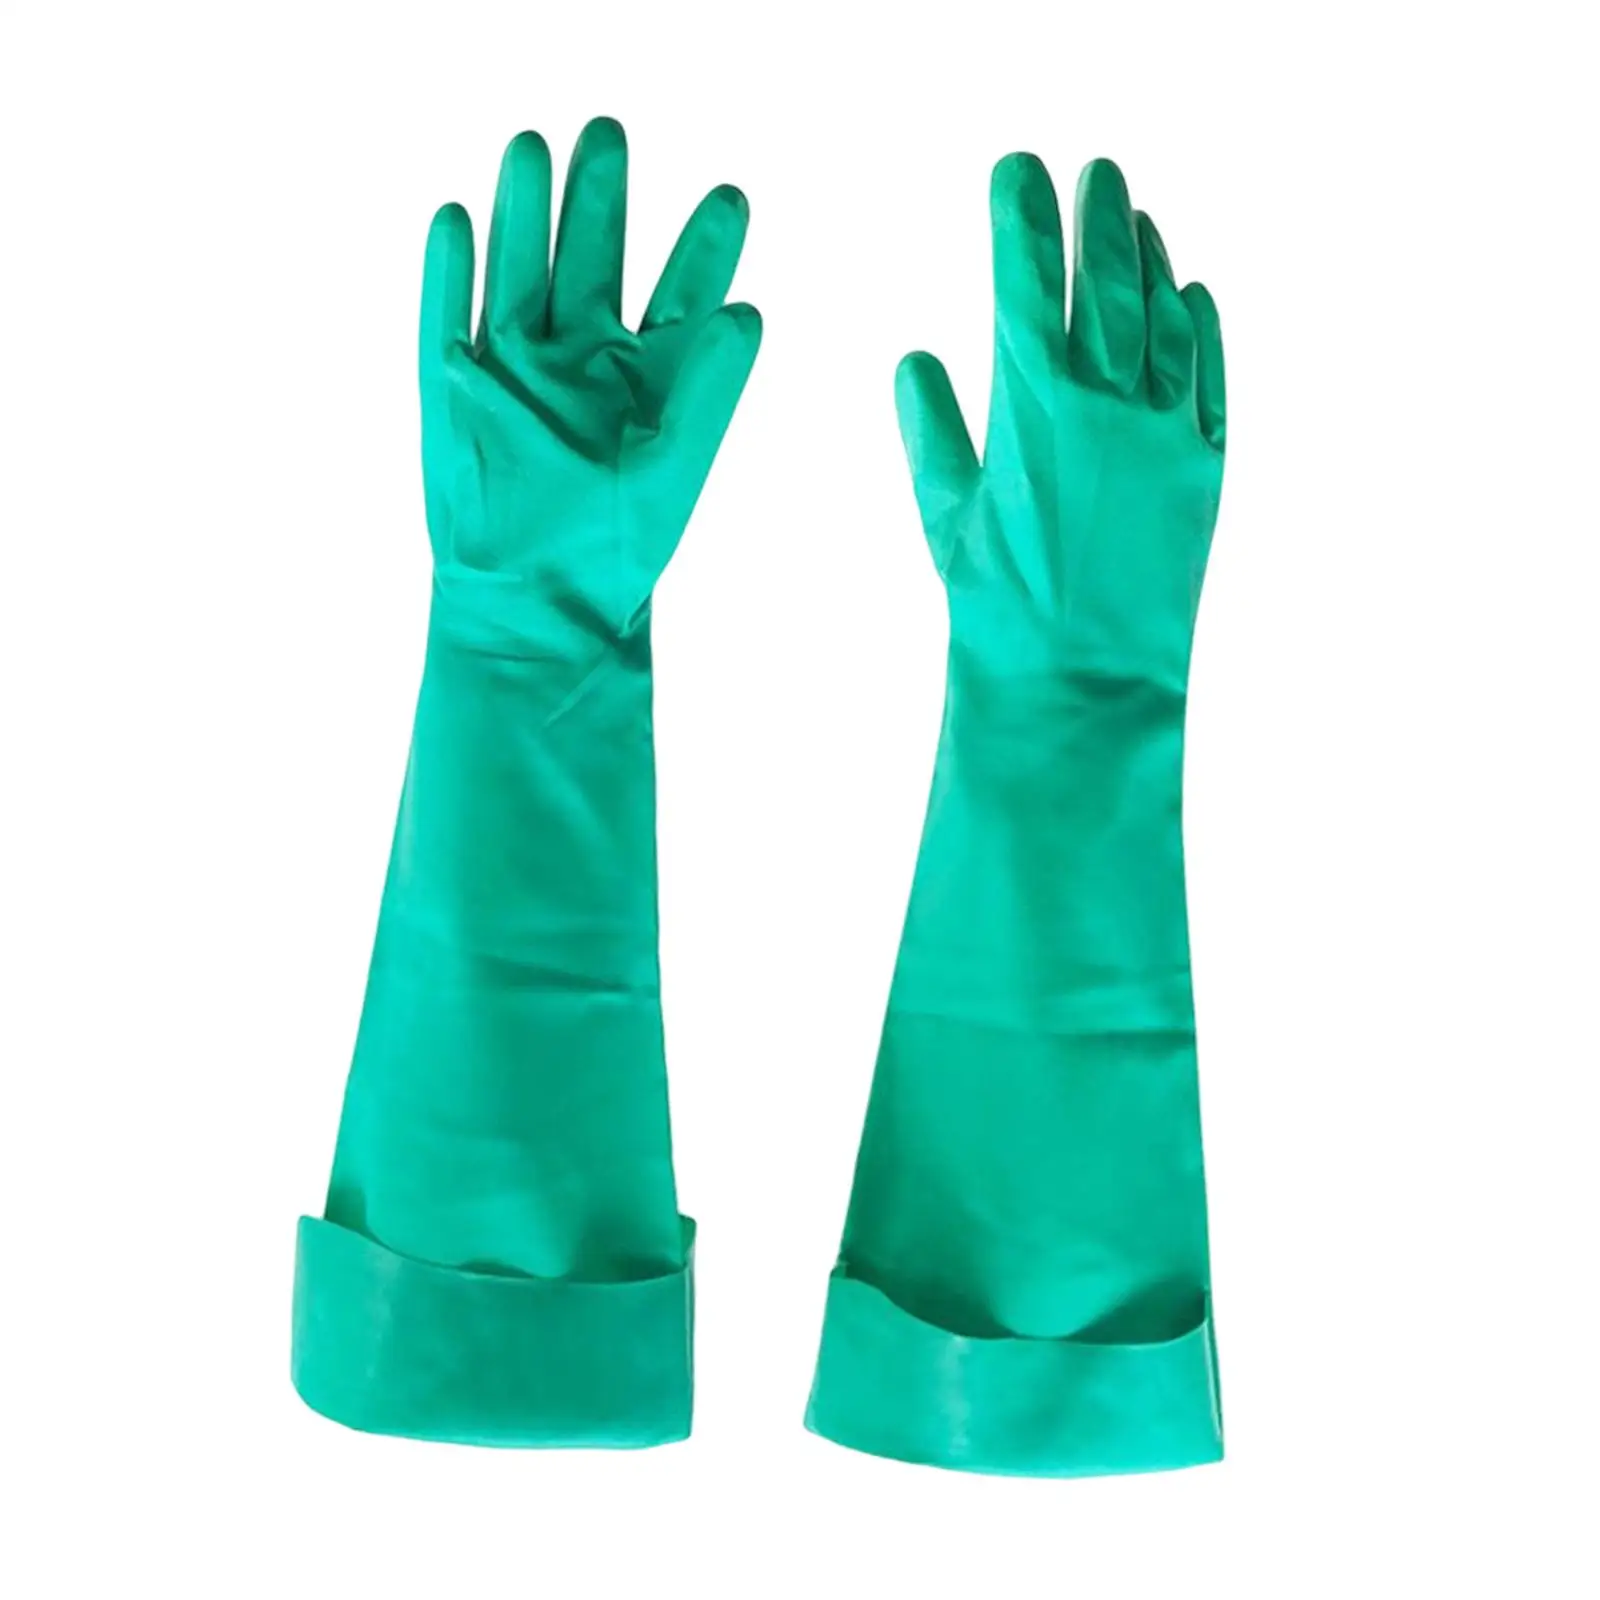 Household Nitrile Gloves Cleaning Hands Reusable Rubber Gloves for Kitchen